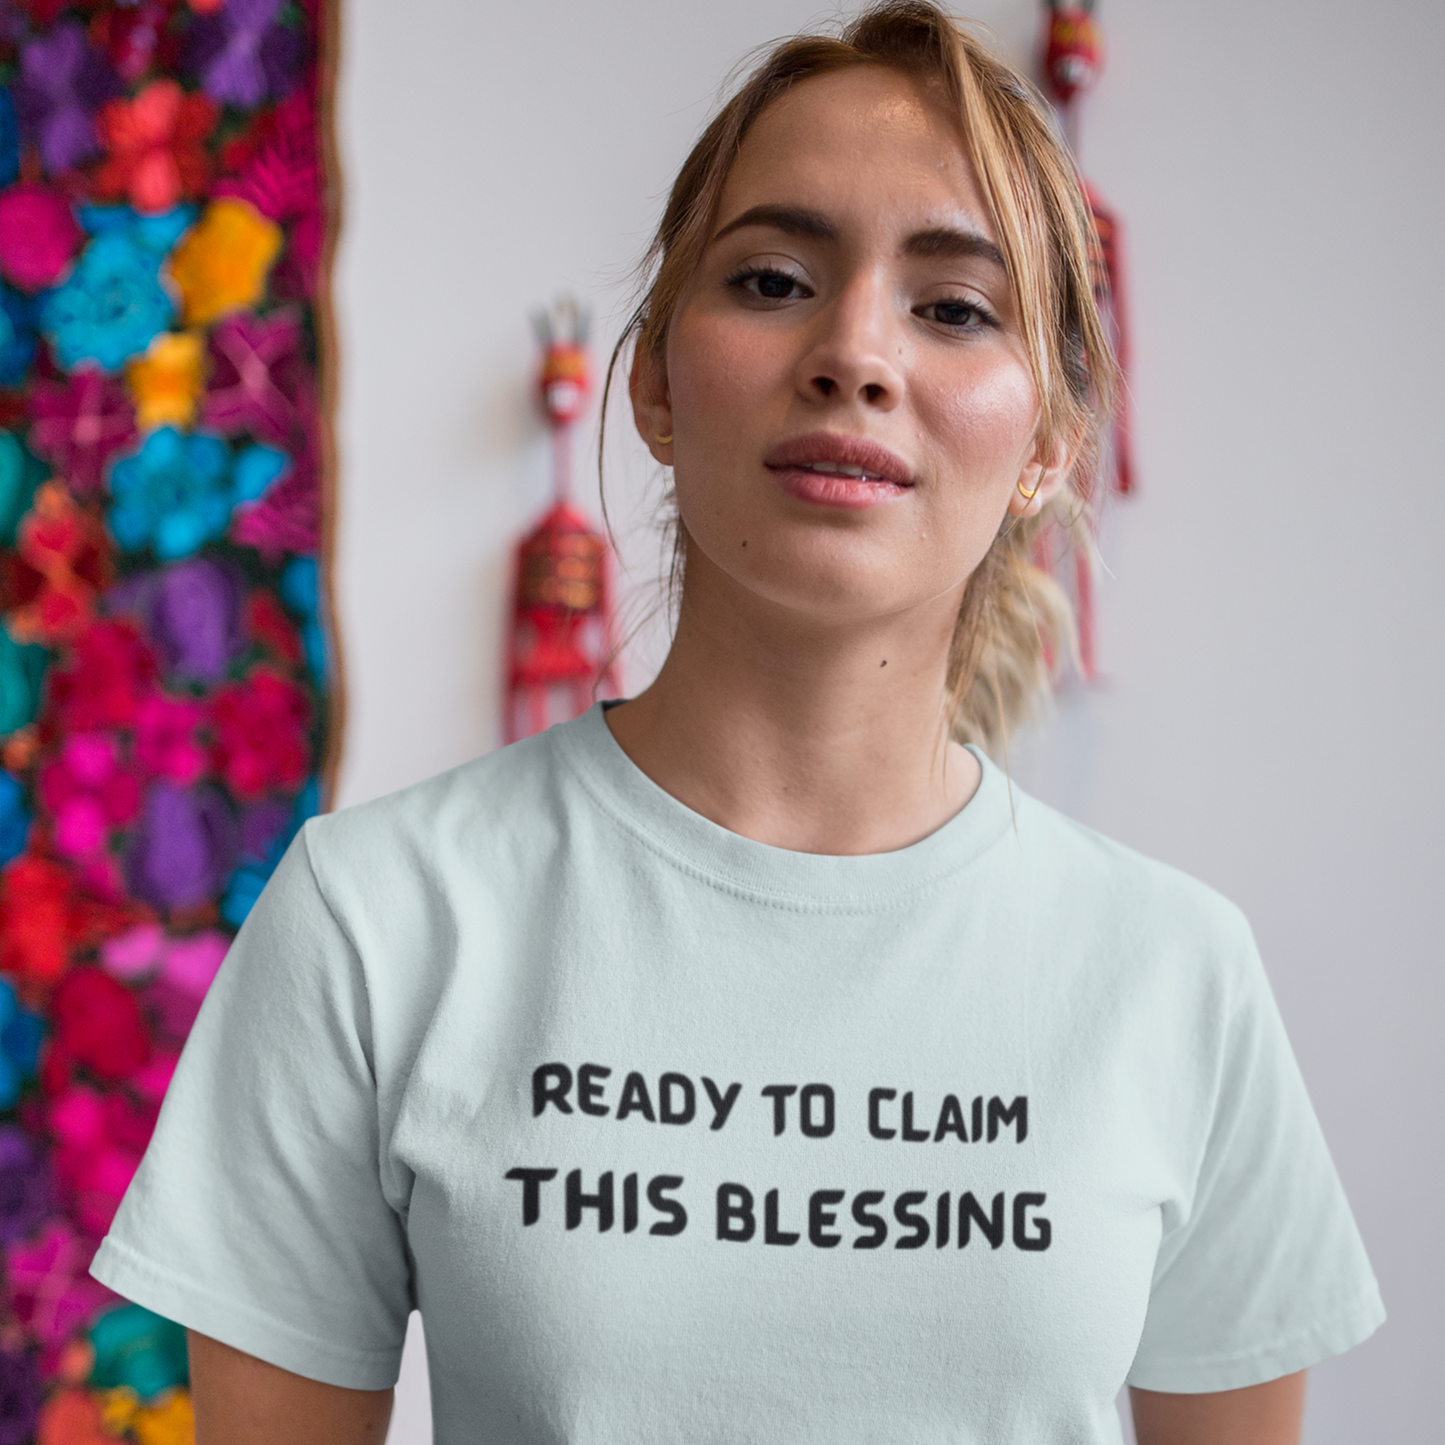 READY TO CLAIM THIS BLESSINF UNISEX INSPIRATIONAL WORDS T SHIRT